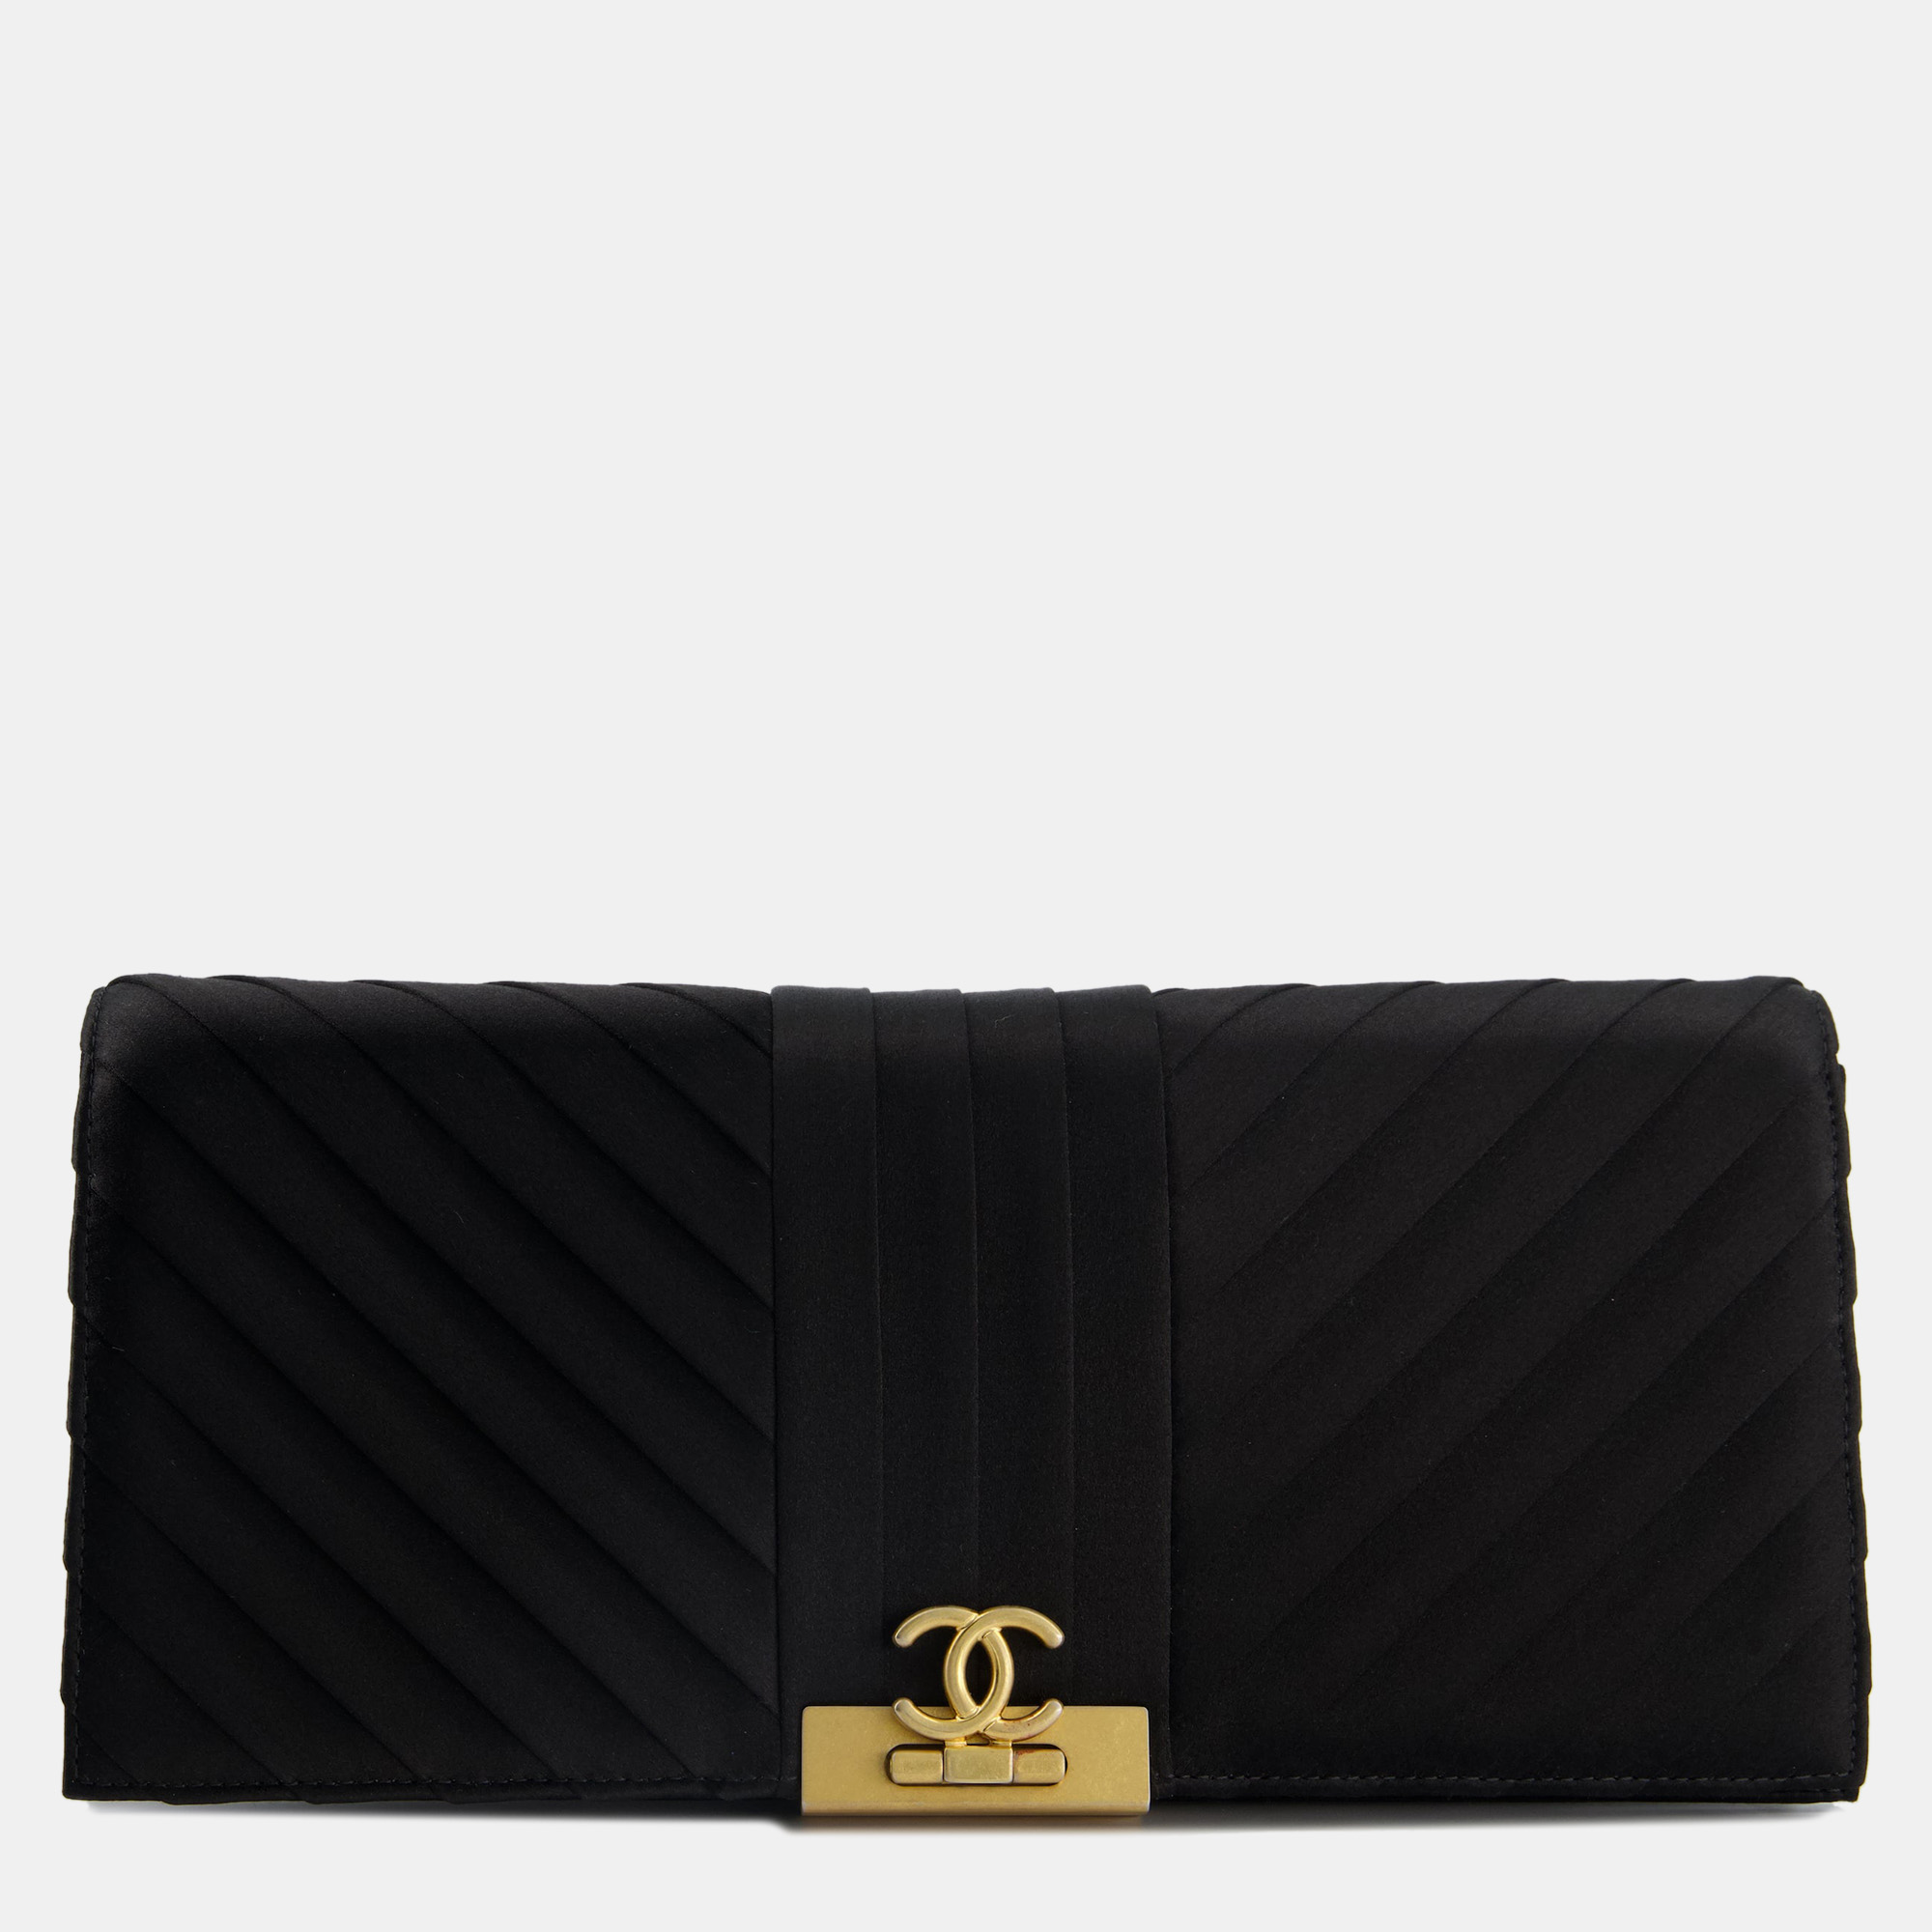 Chanel black satin long-line clutch bag with brushed gold hardware and cc detail